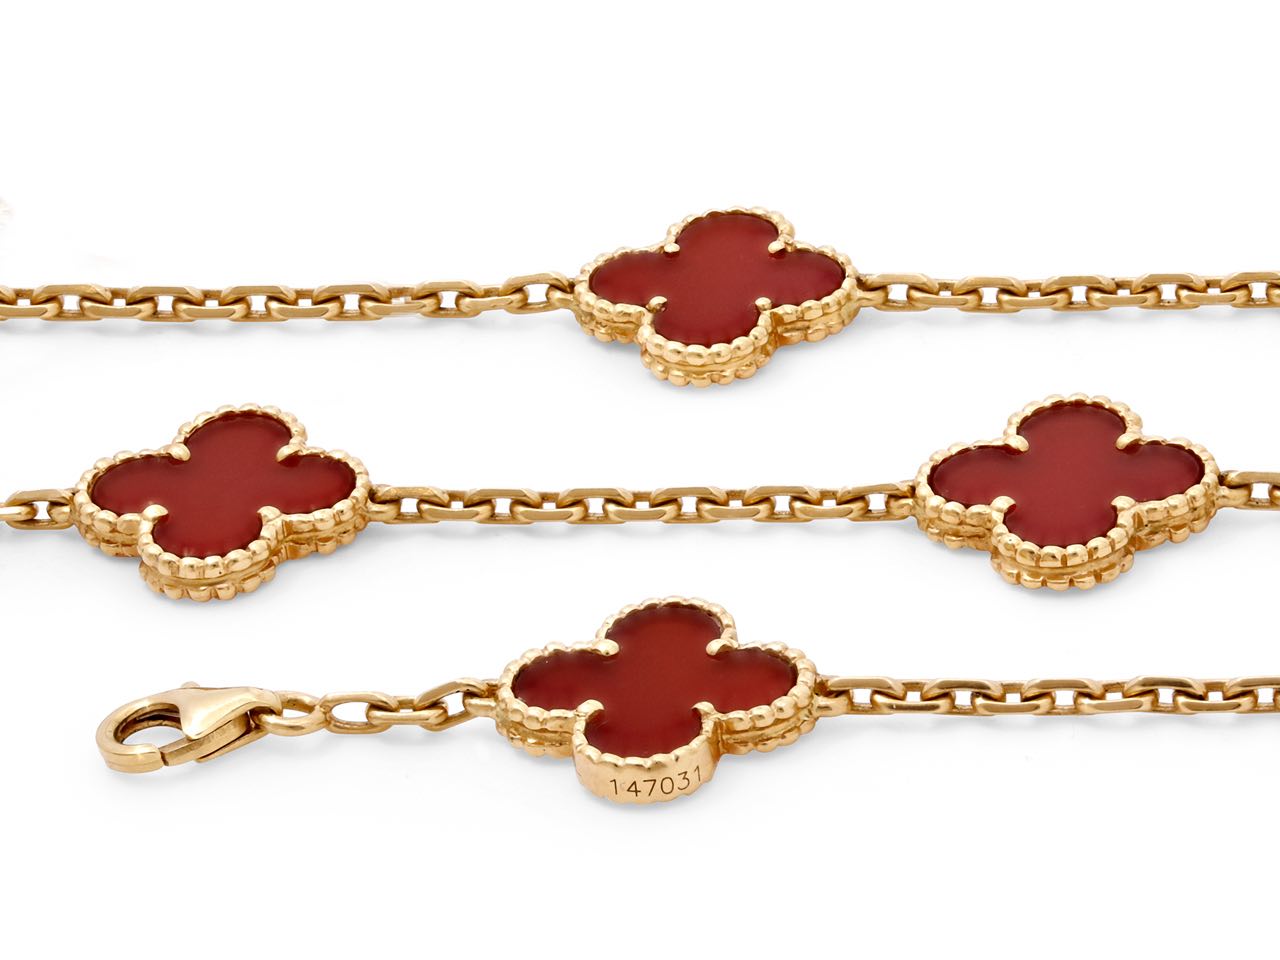 Van Cleef & Arpels Alhambra Necklace: A Guide to Buying and Selling